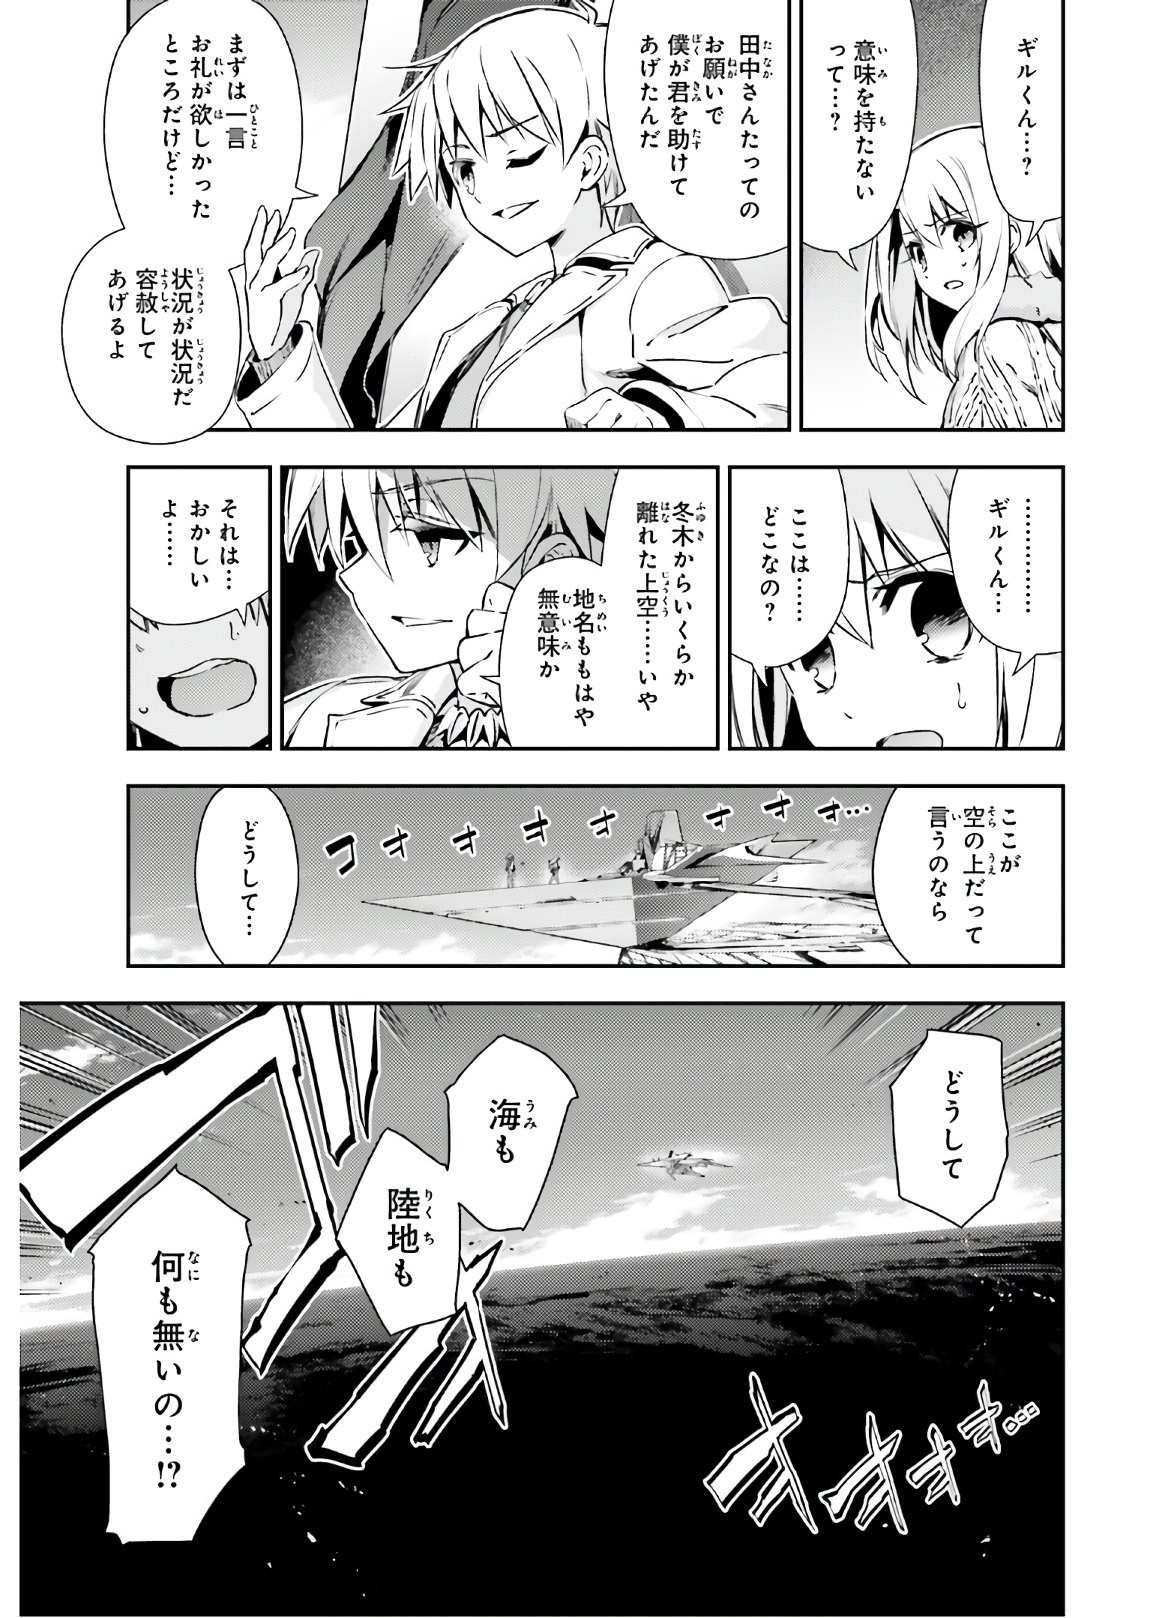 Fate/Kaleid Liner Prisma Illya Drei! - Chapter 62-1 - Page 3